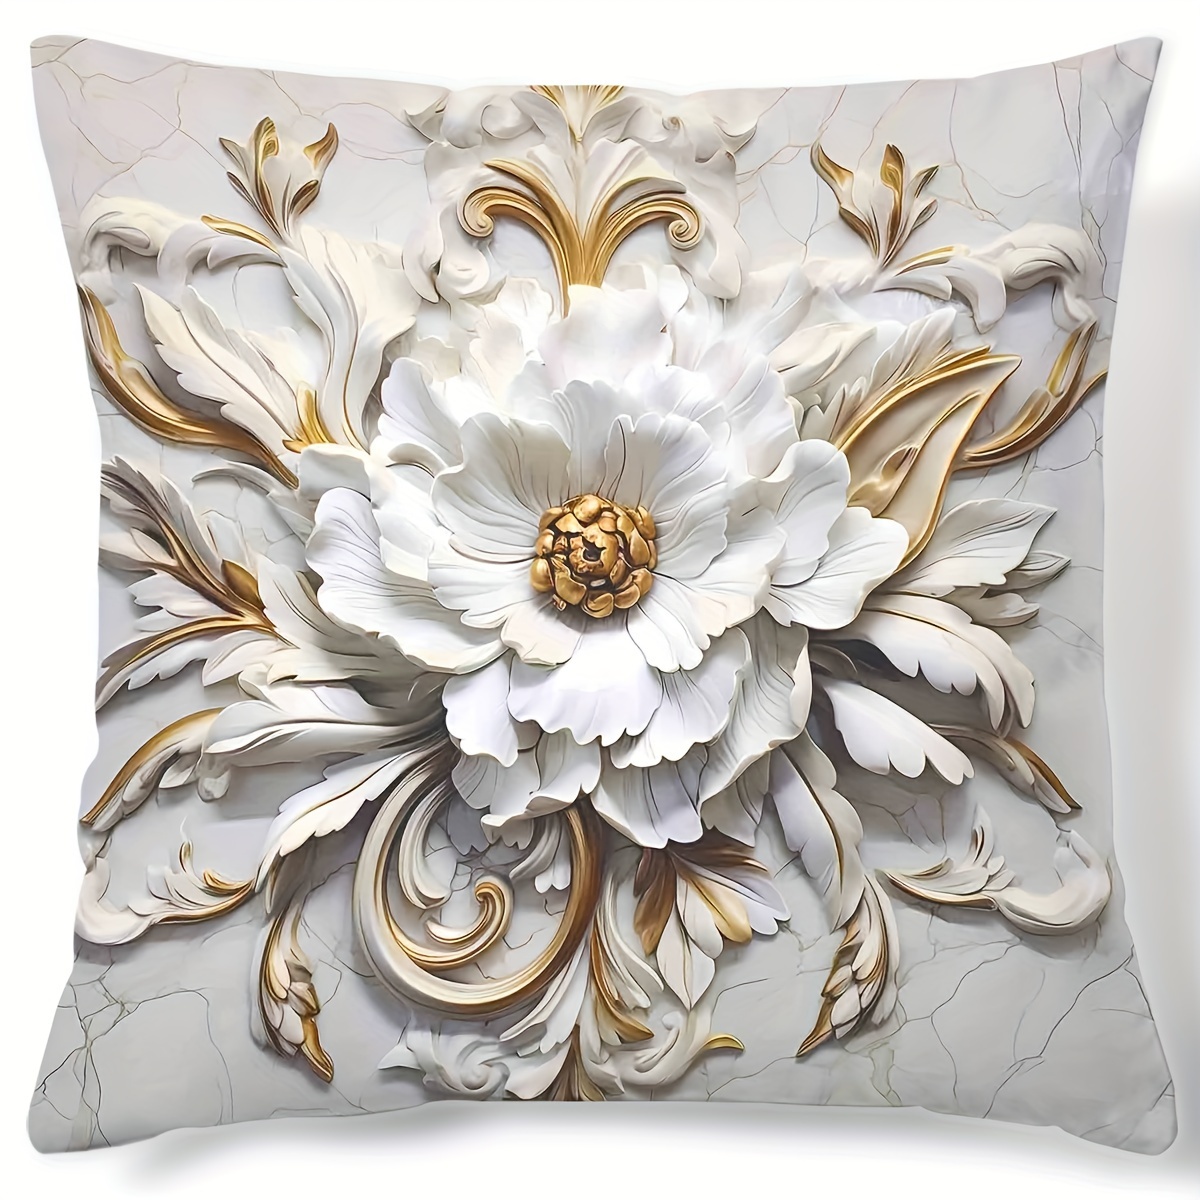 

1pc 3d Floral Pattern Digital Print Throw Pillow Cover, Contemporary Style, Elegant Home Decor Cushion Case, 18x18 Inches